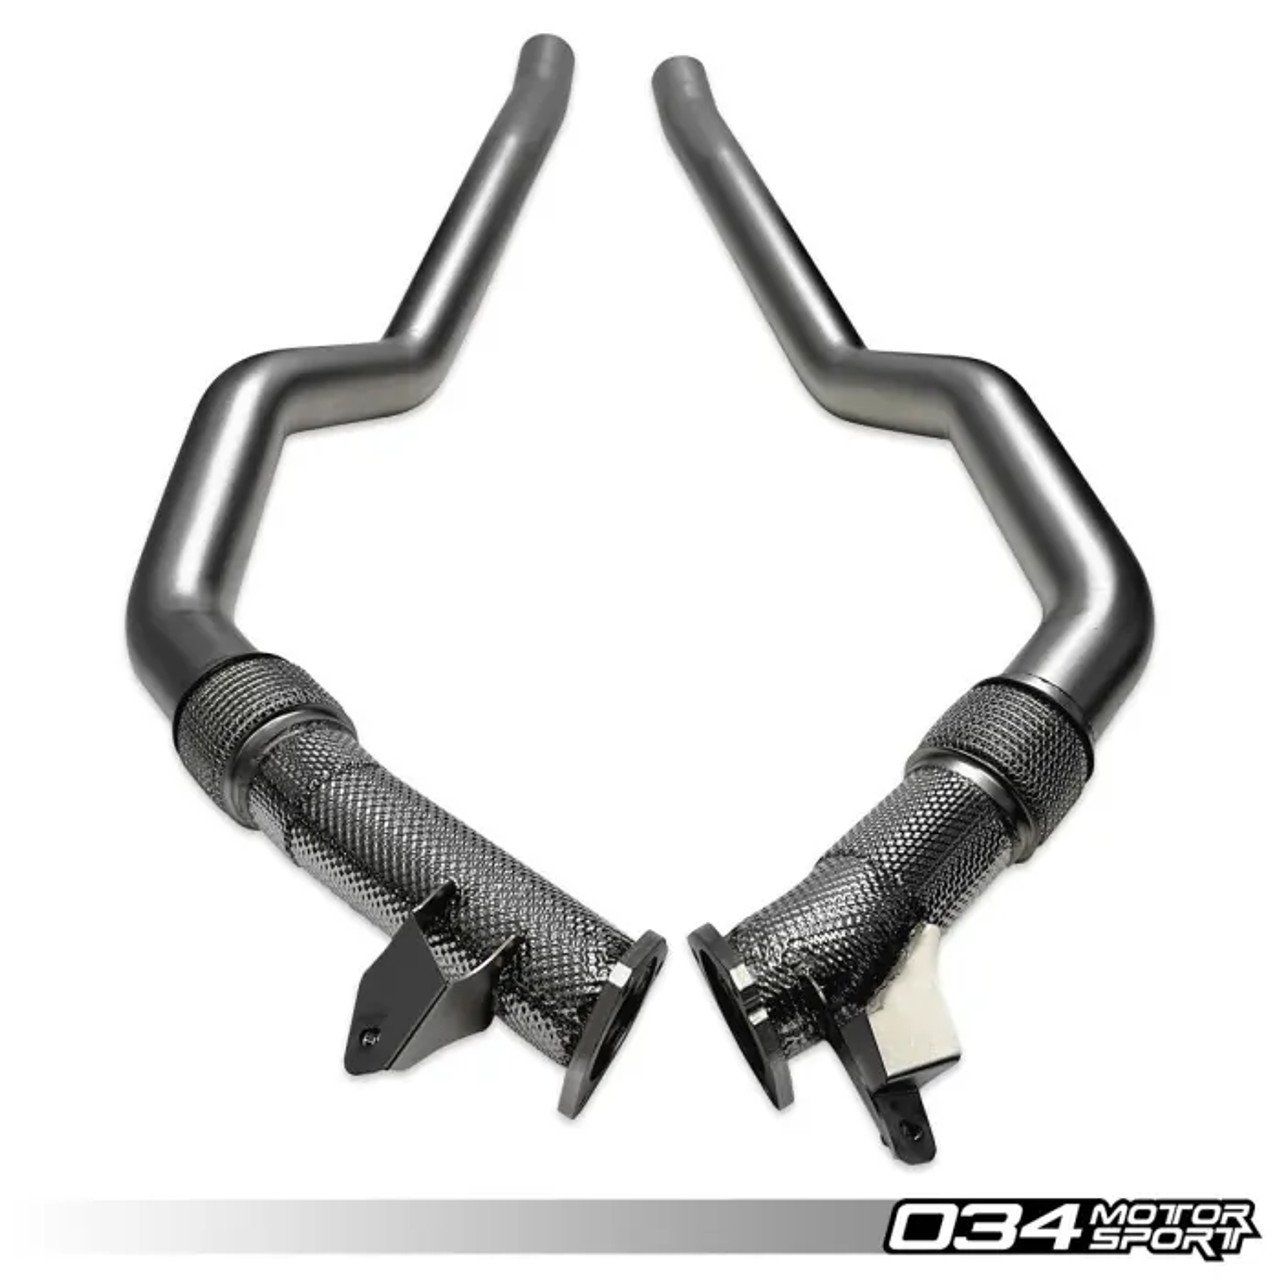 034Motorsport Res-X Resonator Delete for C8 RS6 & RS7